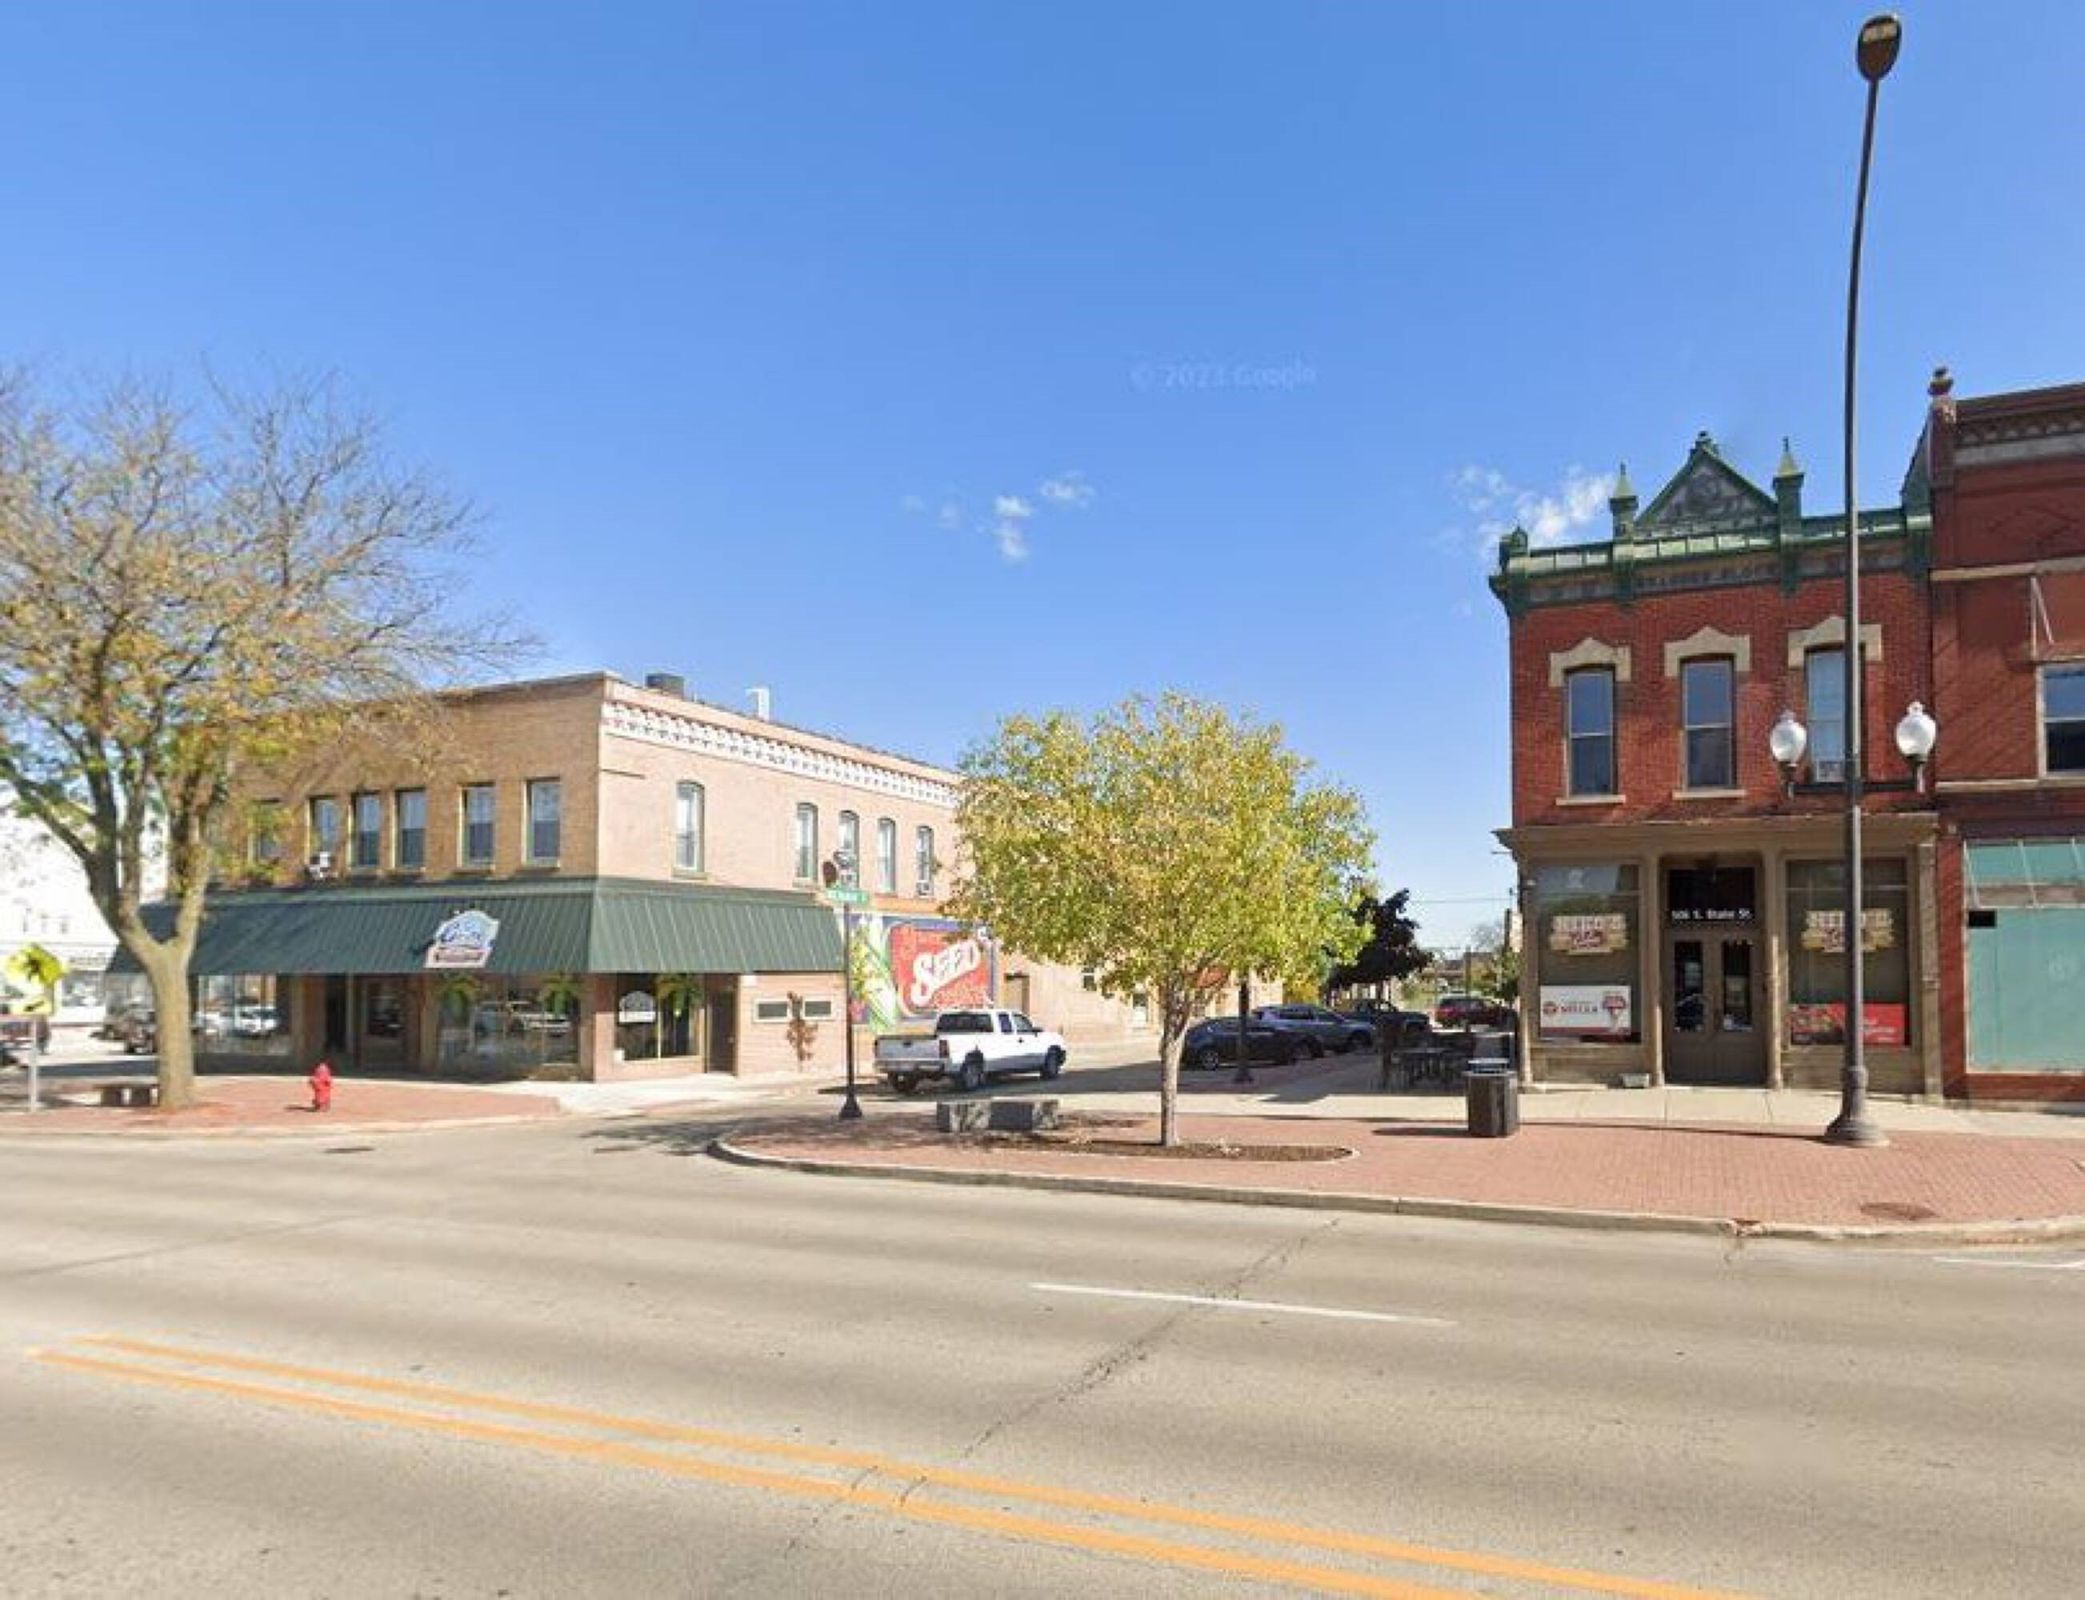 Main Photo For Building Available in Downtown Belvidere